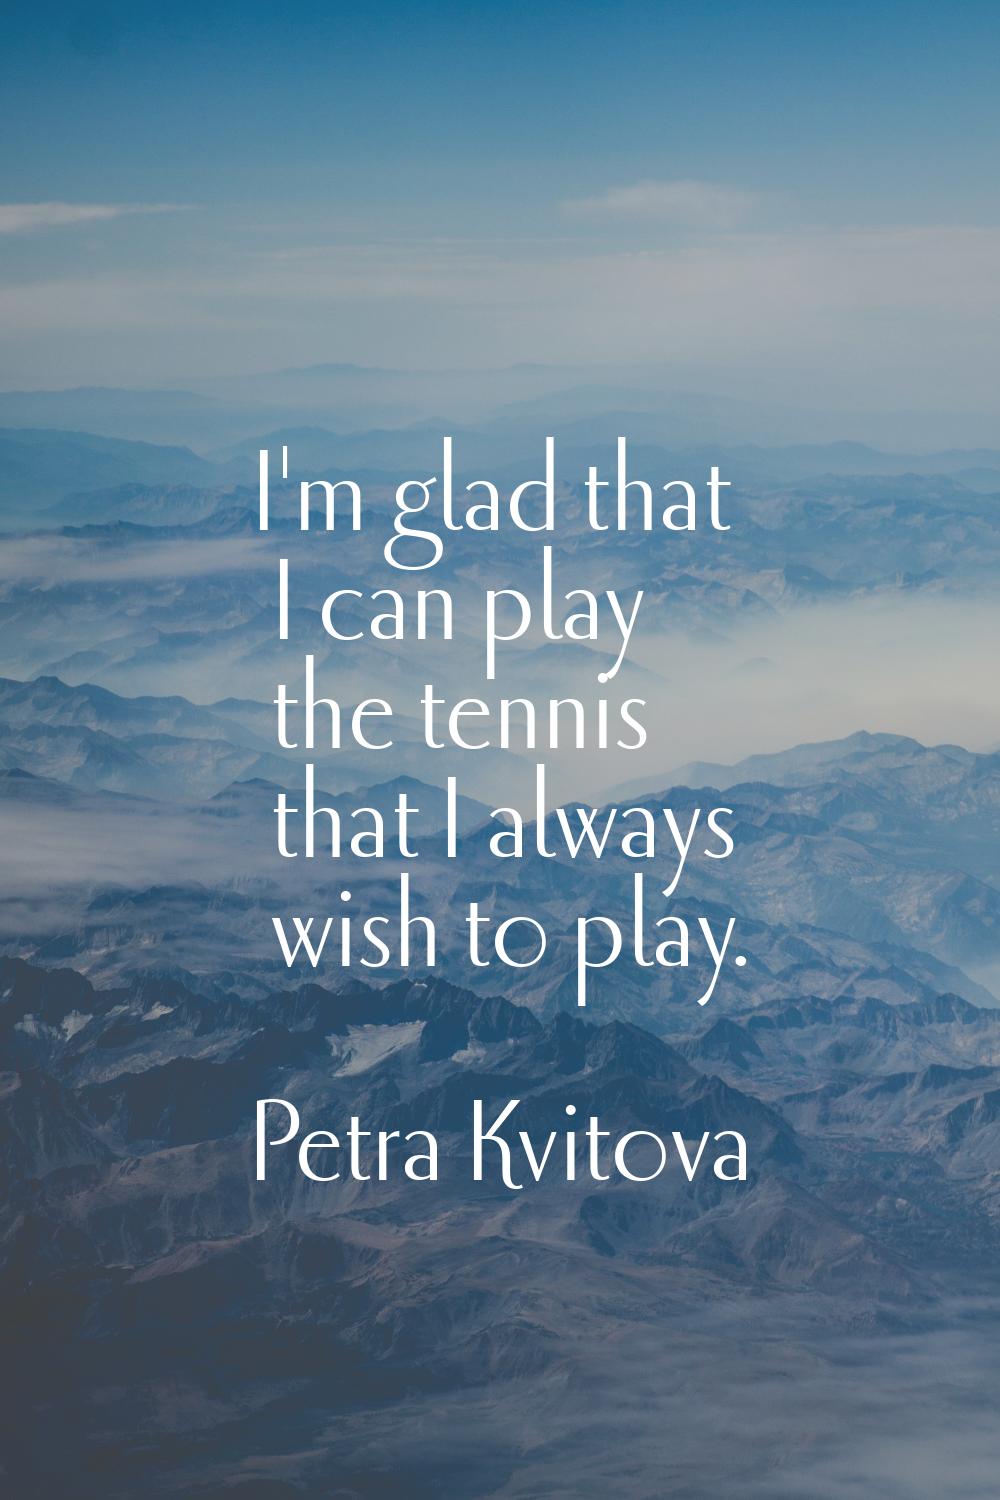 I'm glad that I can play the tennis that I always wish to play.